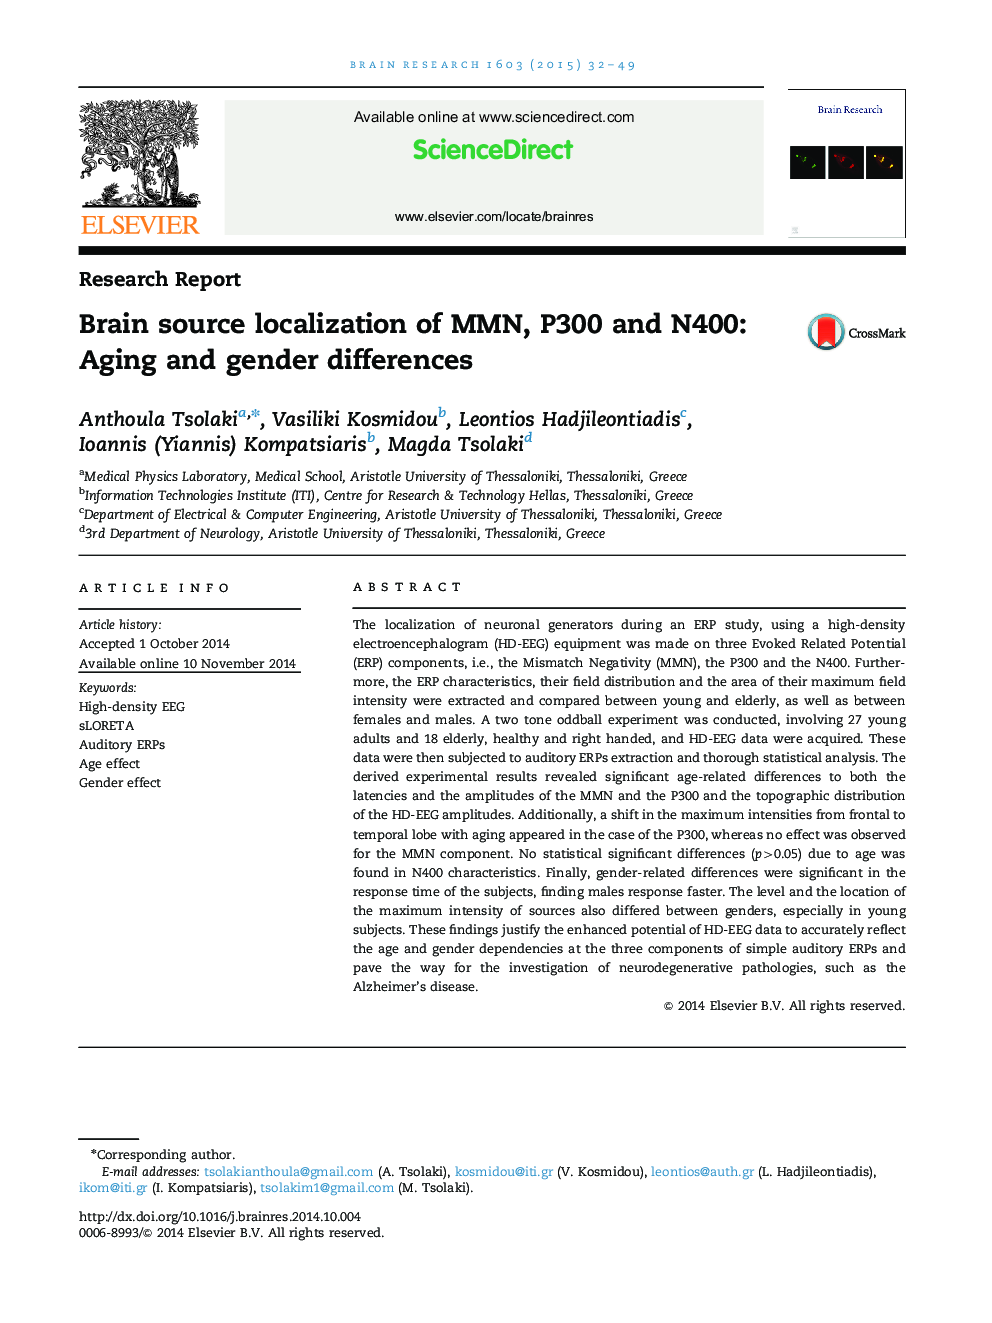 Brain source localization of MMN, P300 and N400: Aging and gender differences